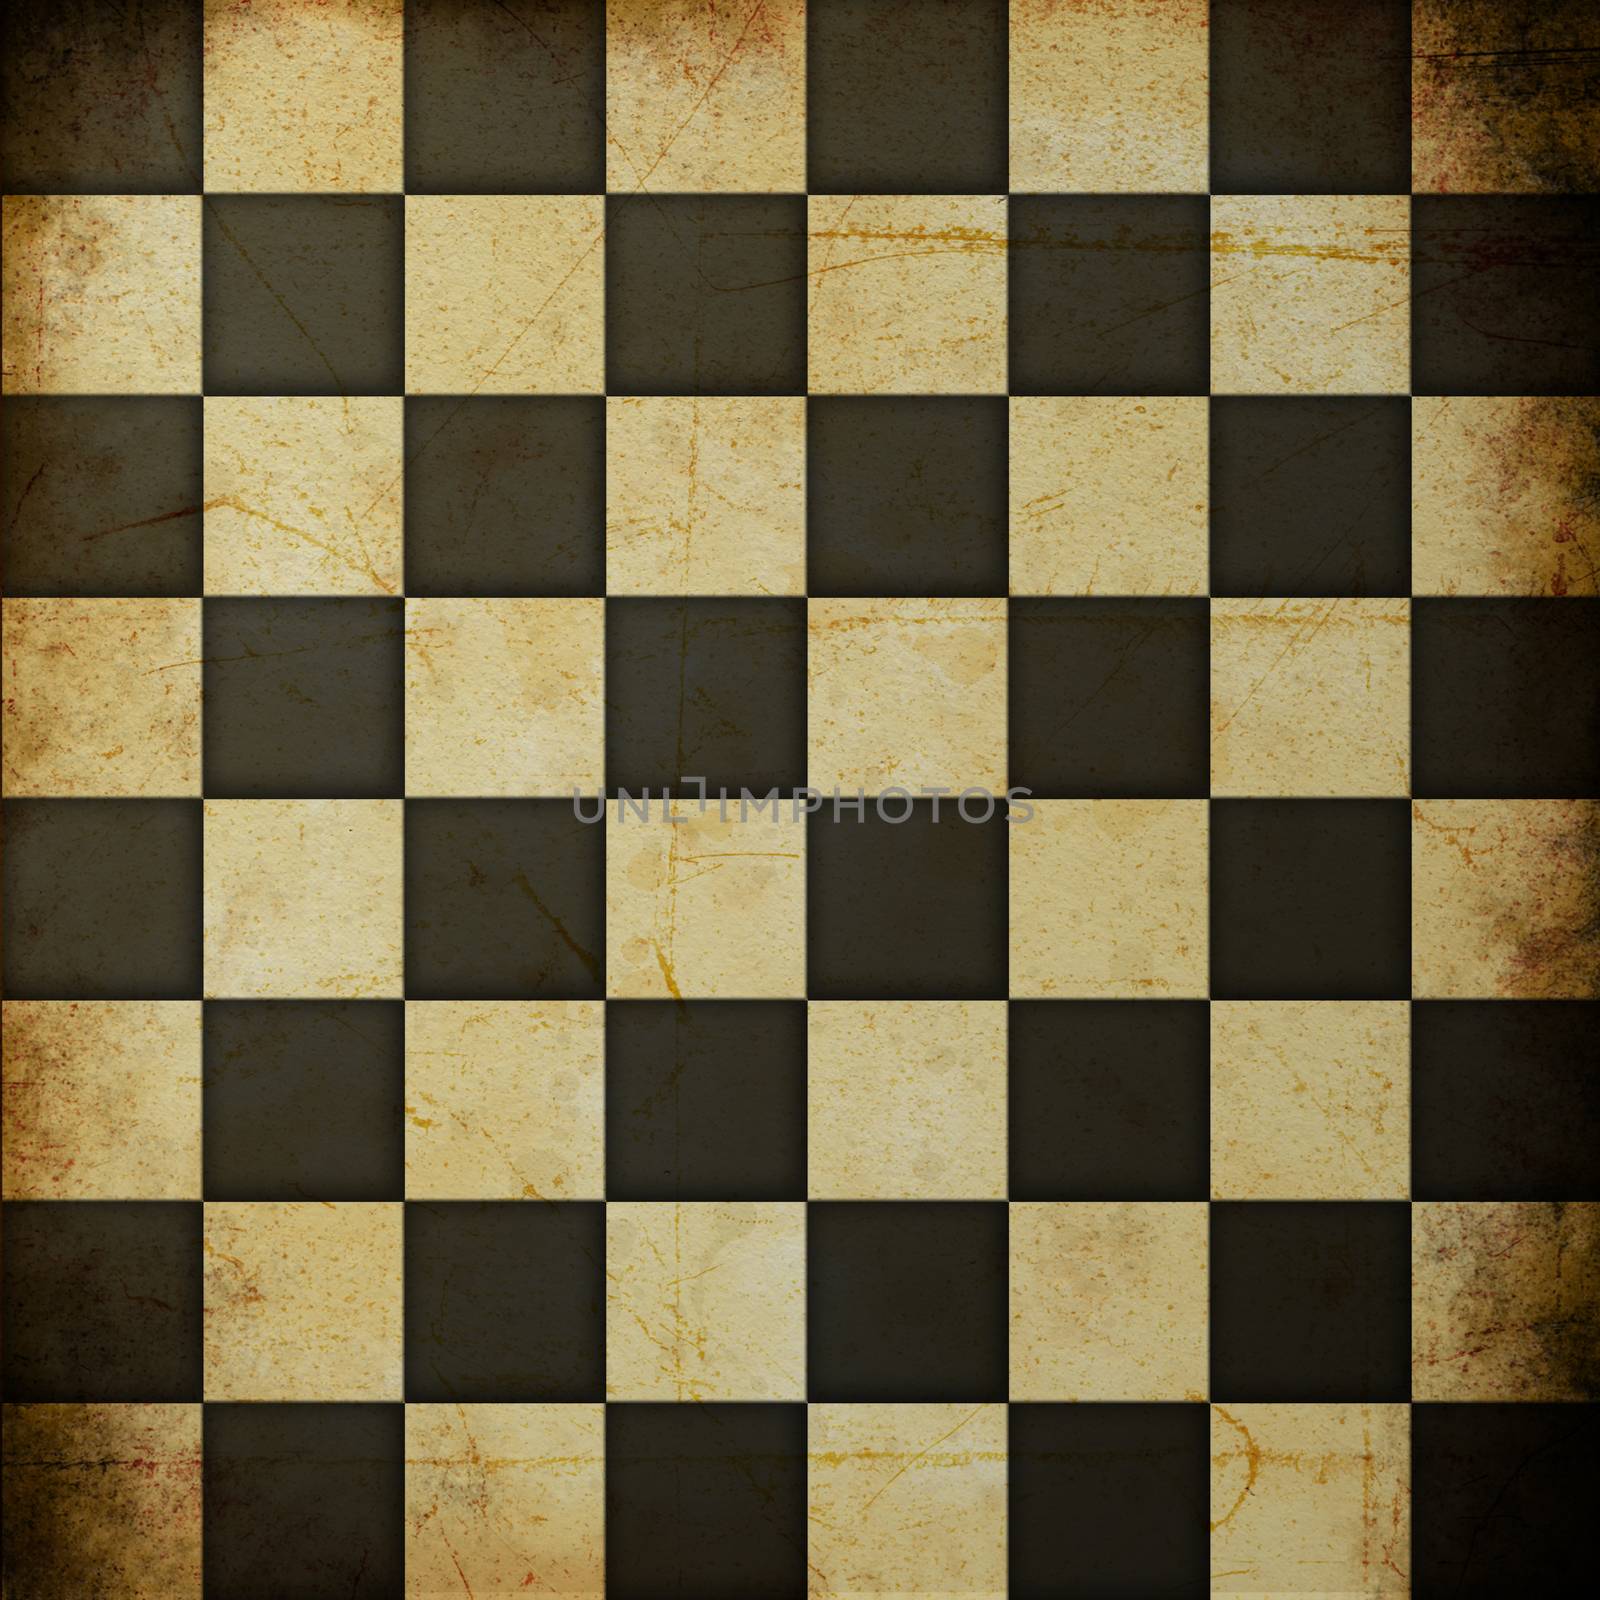 texture, vintage background of the chessboard design on grunge p by tor00722